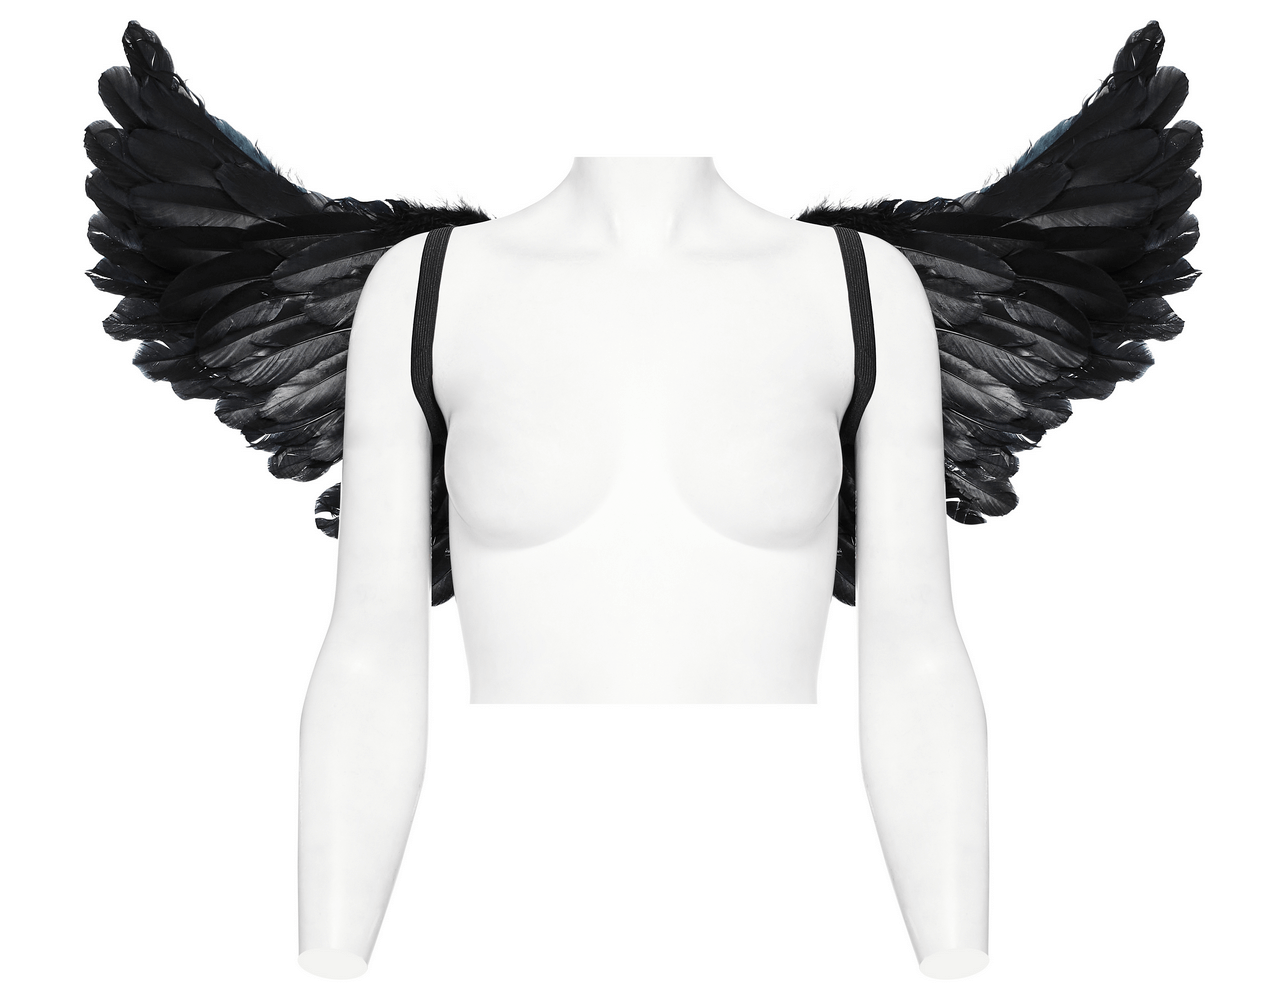 Edgy Gothic Demon Feather Wing Harness with Chains